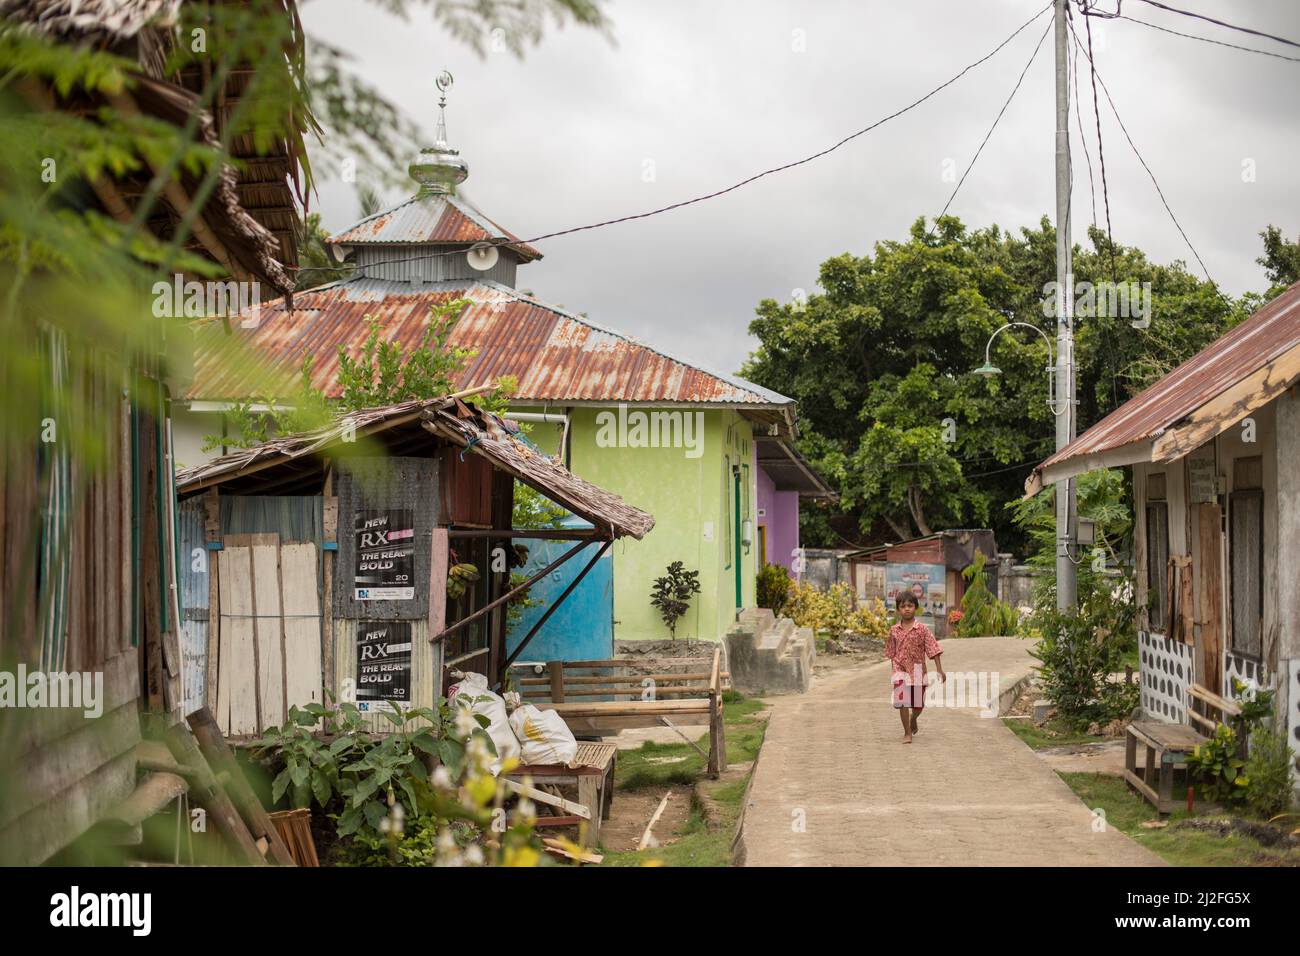 Pedestrian walking down a village lane on the remote Indonesian Island of Karampuang, off the coast of Mamuju, Sulawesi. Stock Photo